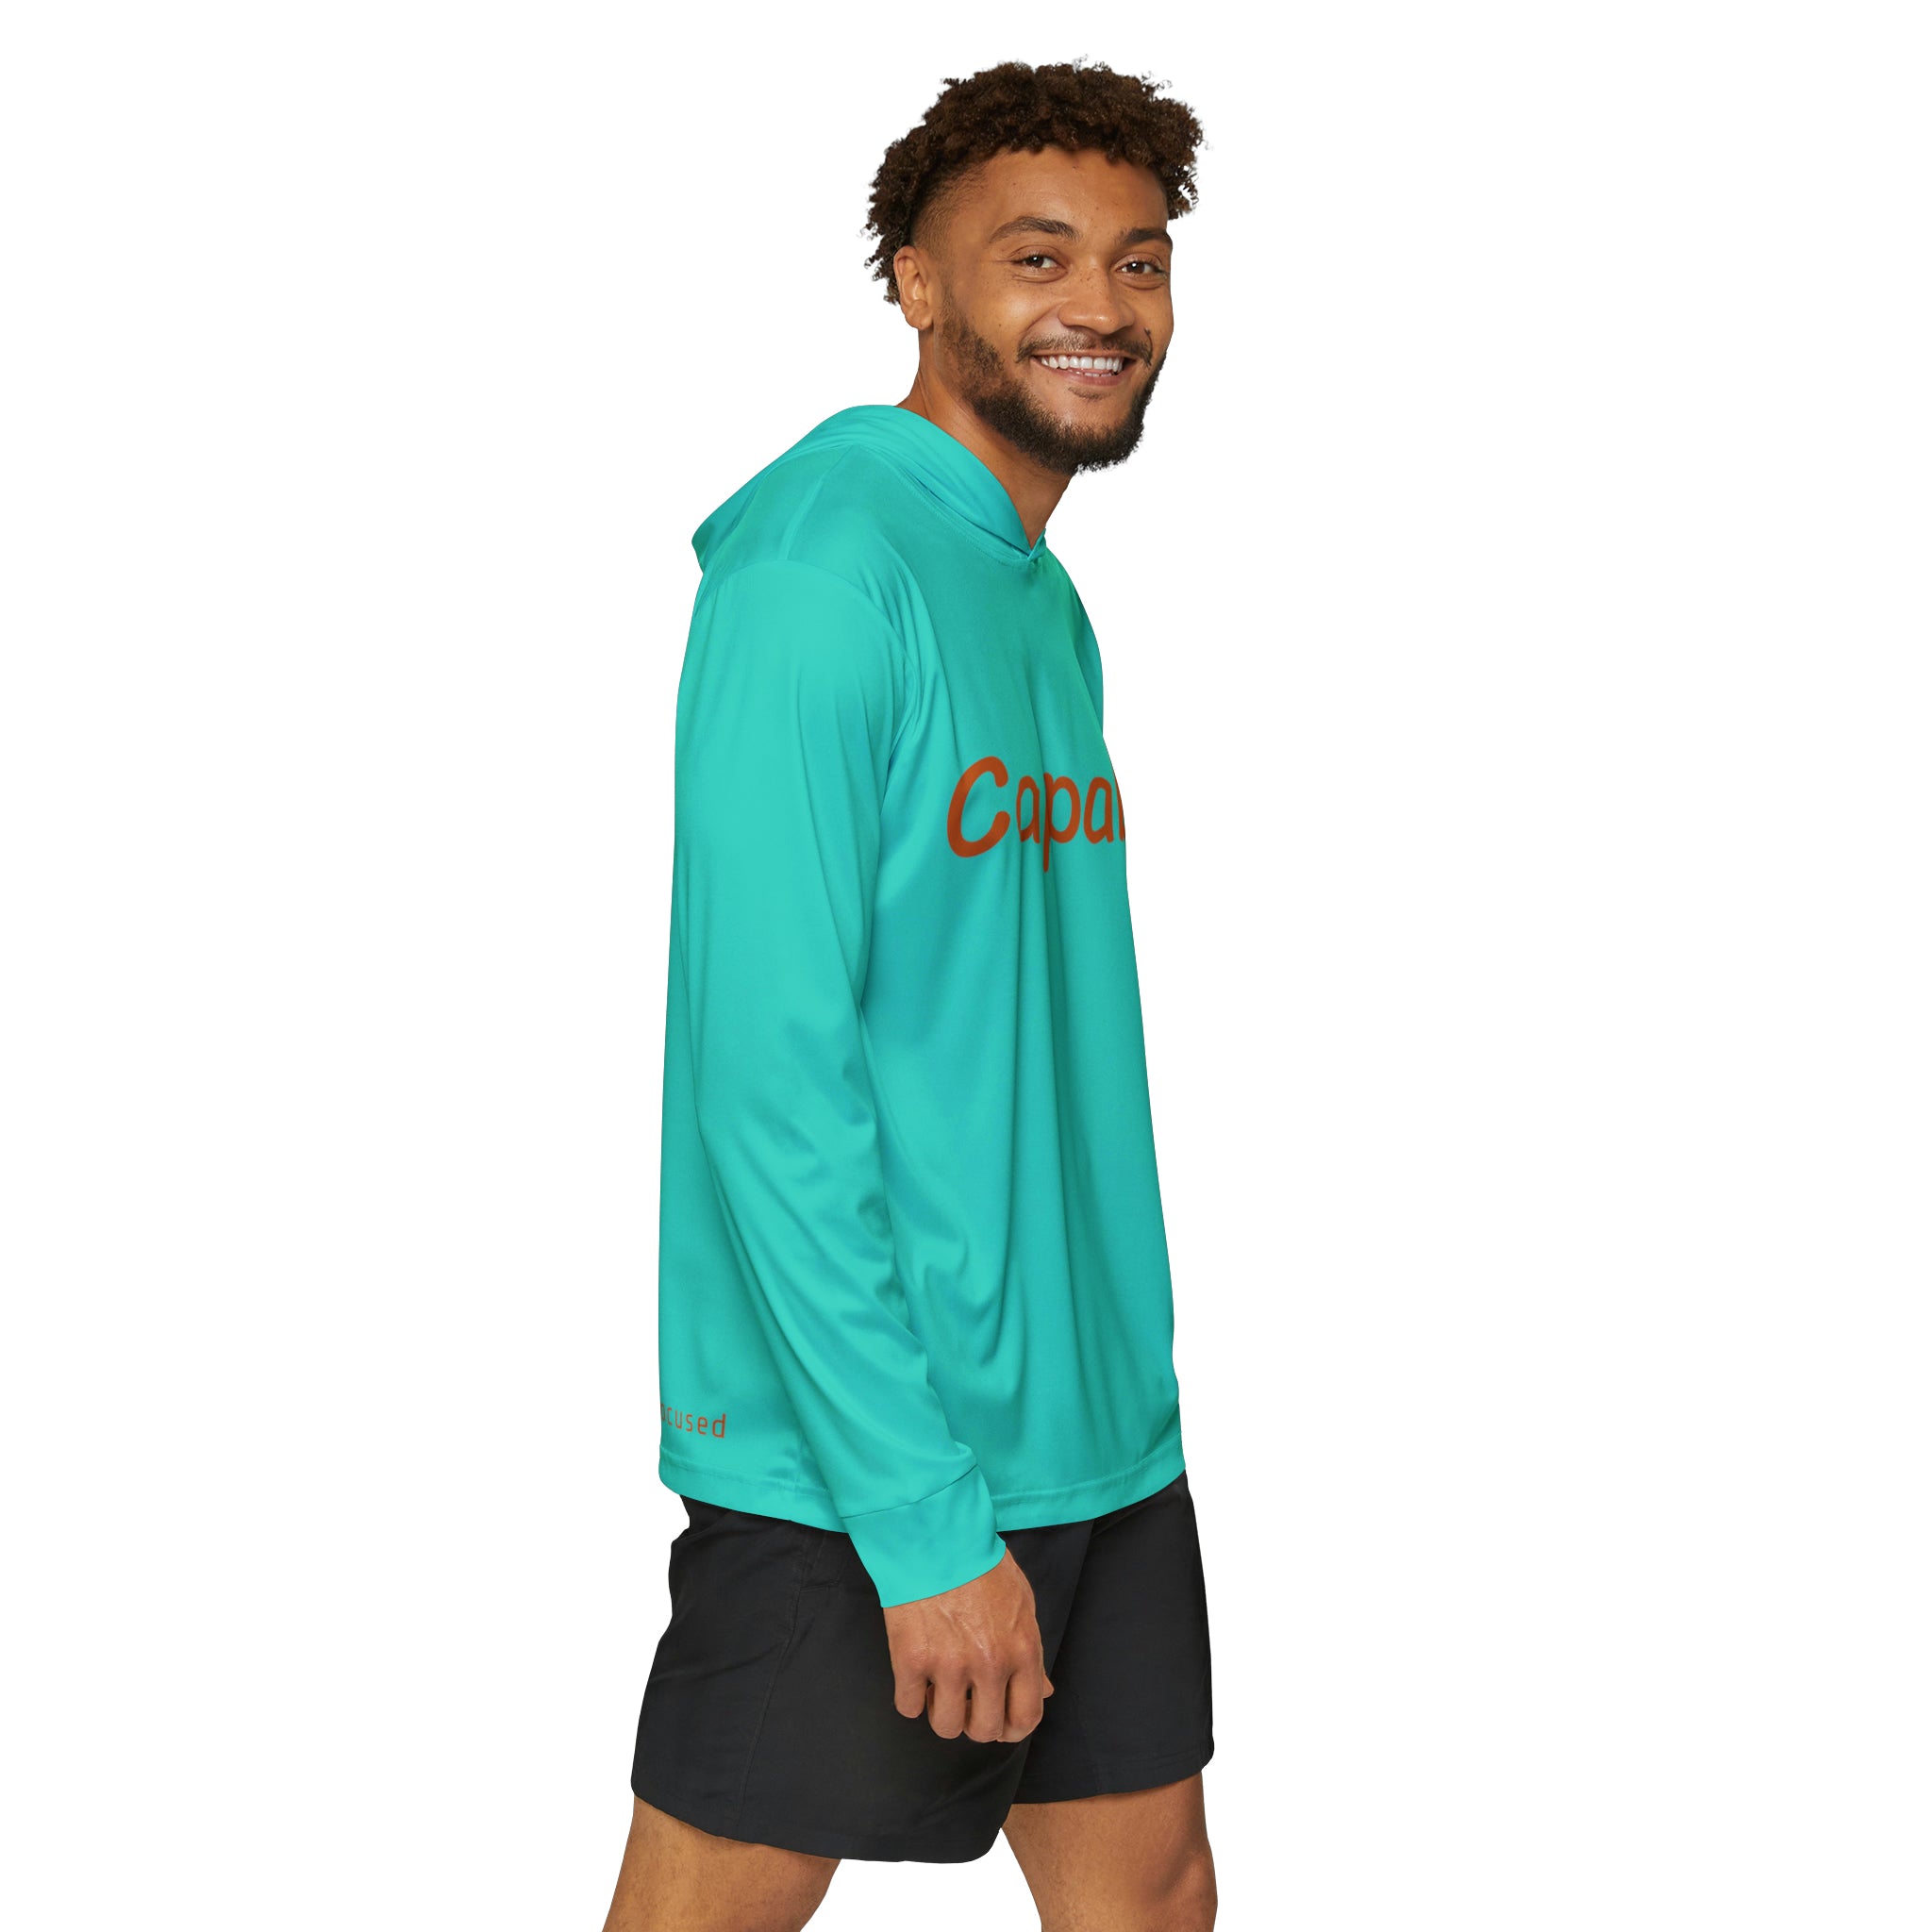 Capable Men's Warmup Hoodie: Elevate Performance Activewear Durable Fabric Made in USA Men's Hoodie Mental Health Support Moisture-wicking Performance Apparel Quality Control Sports Warmup UPF 50+ All Over Prints 7819596886002009647_2048 Printify